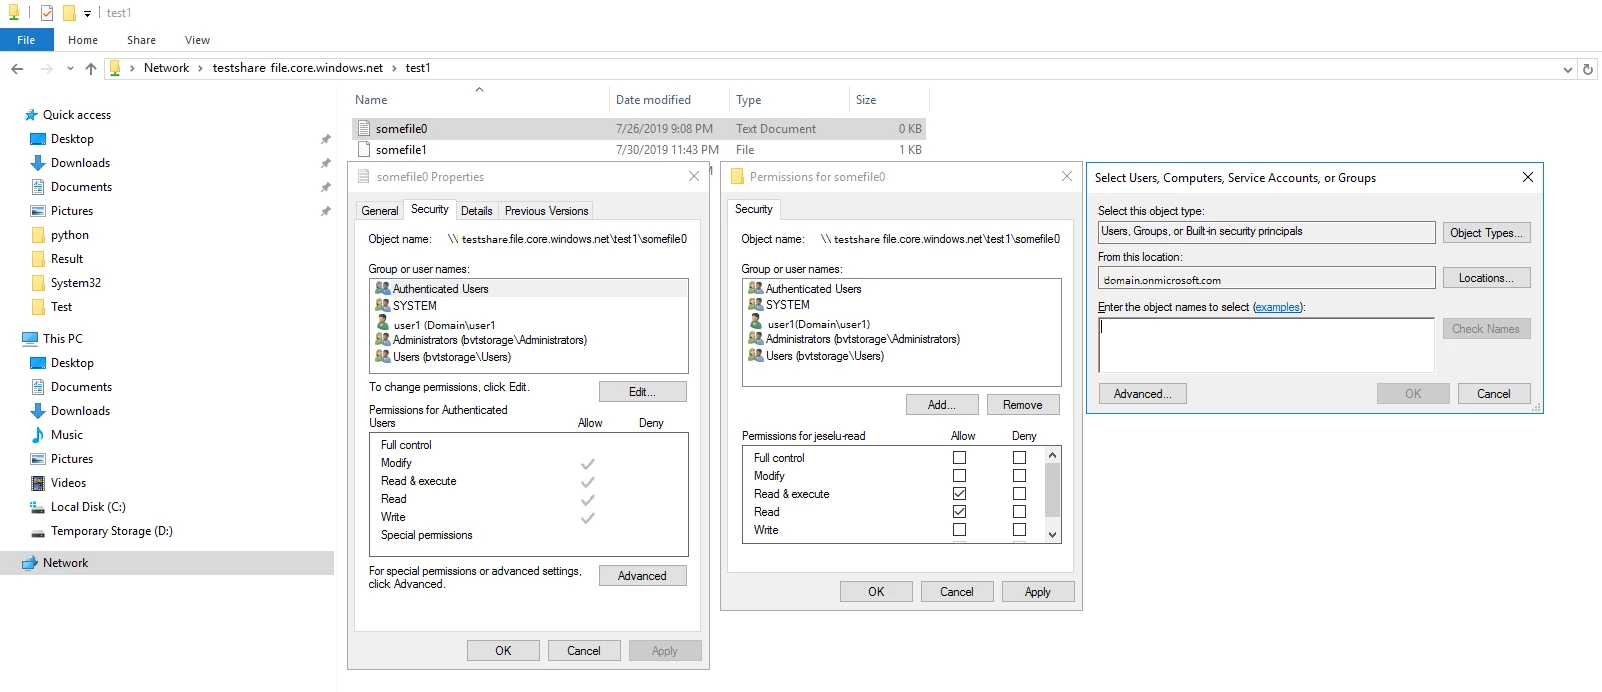 Integration with Windows File Explorer on permission assignments